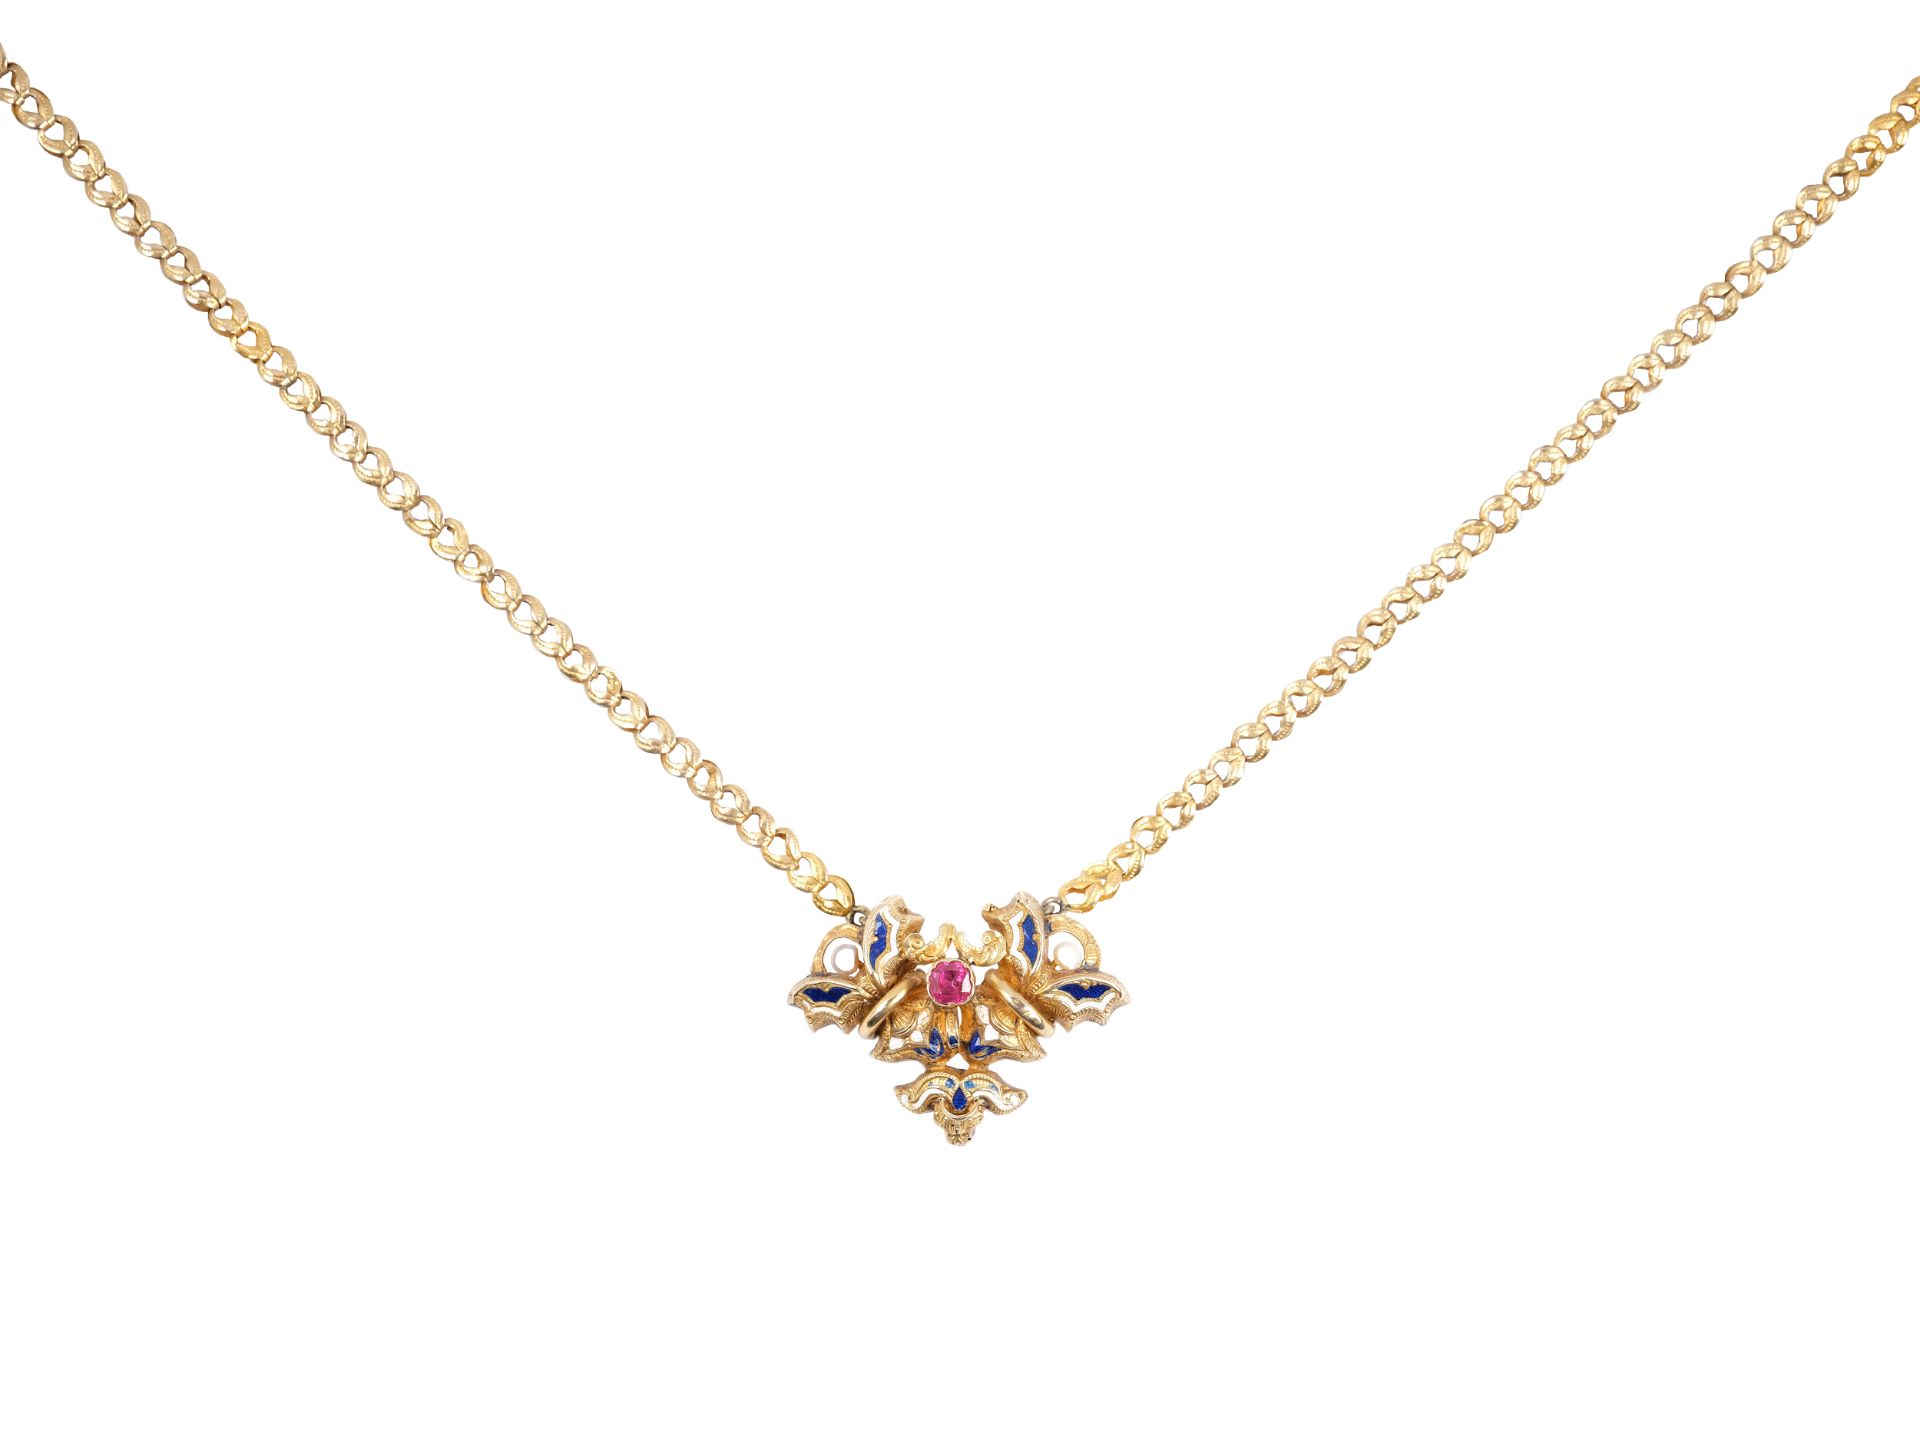 Collier, Um 1860, Gold & Emaille